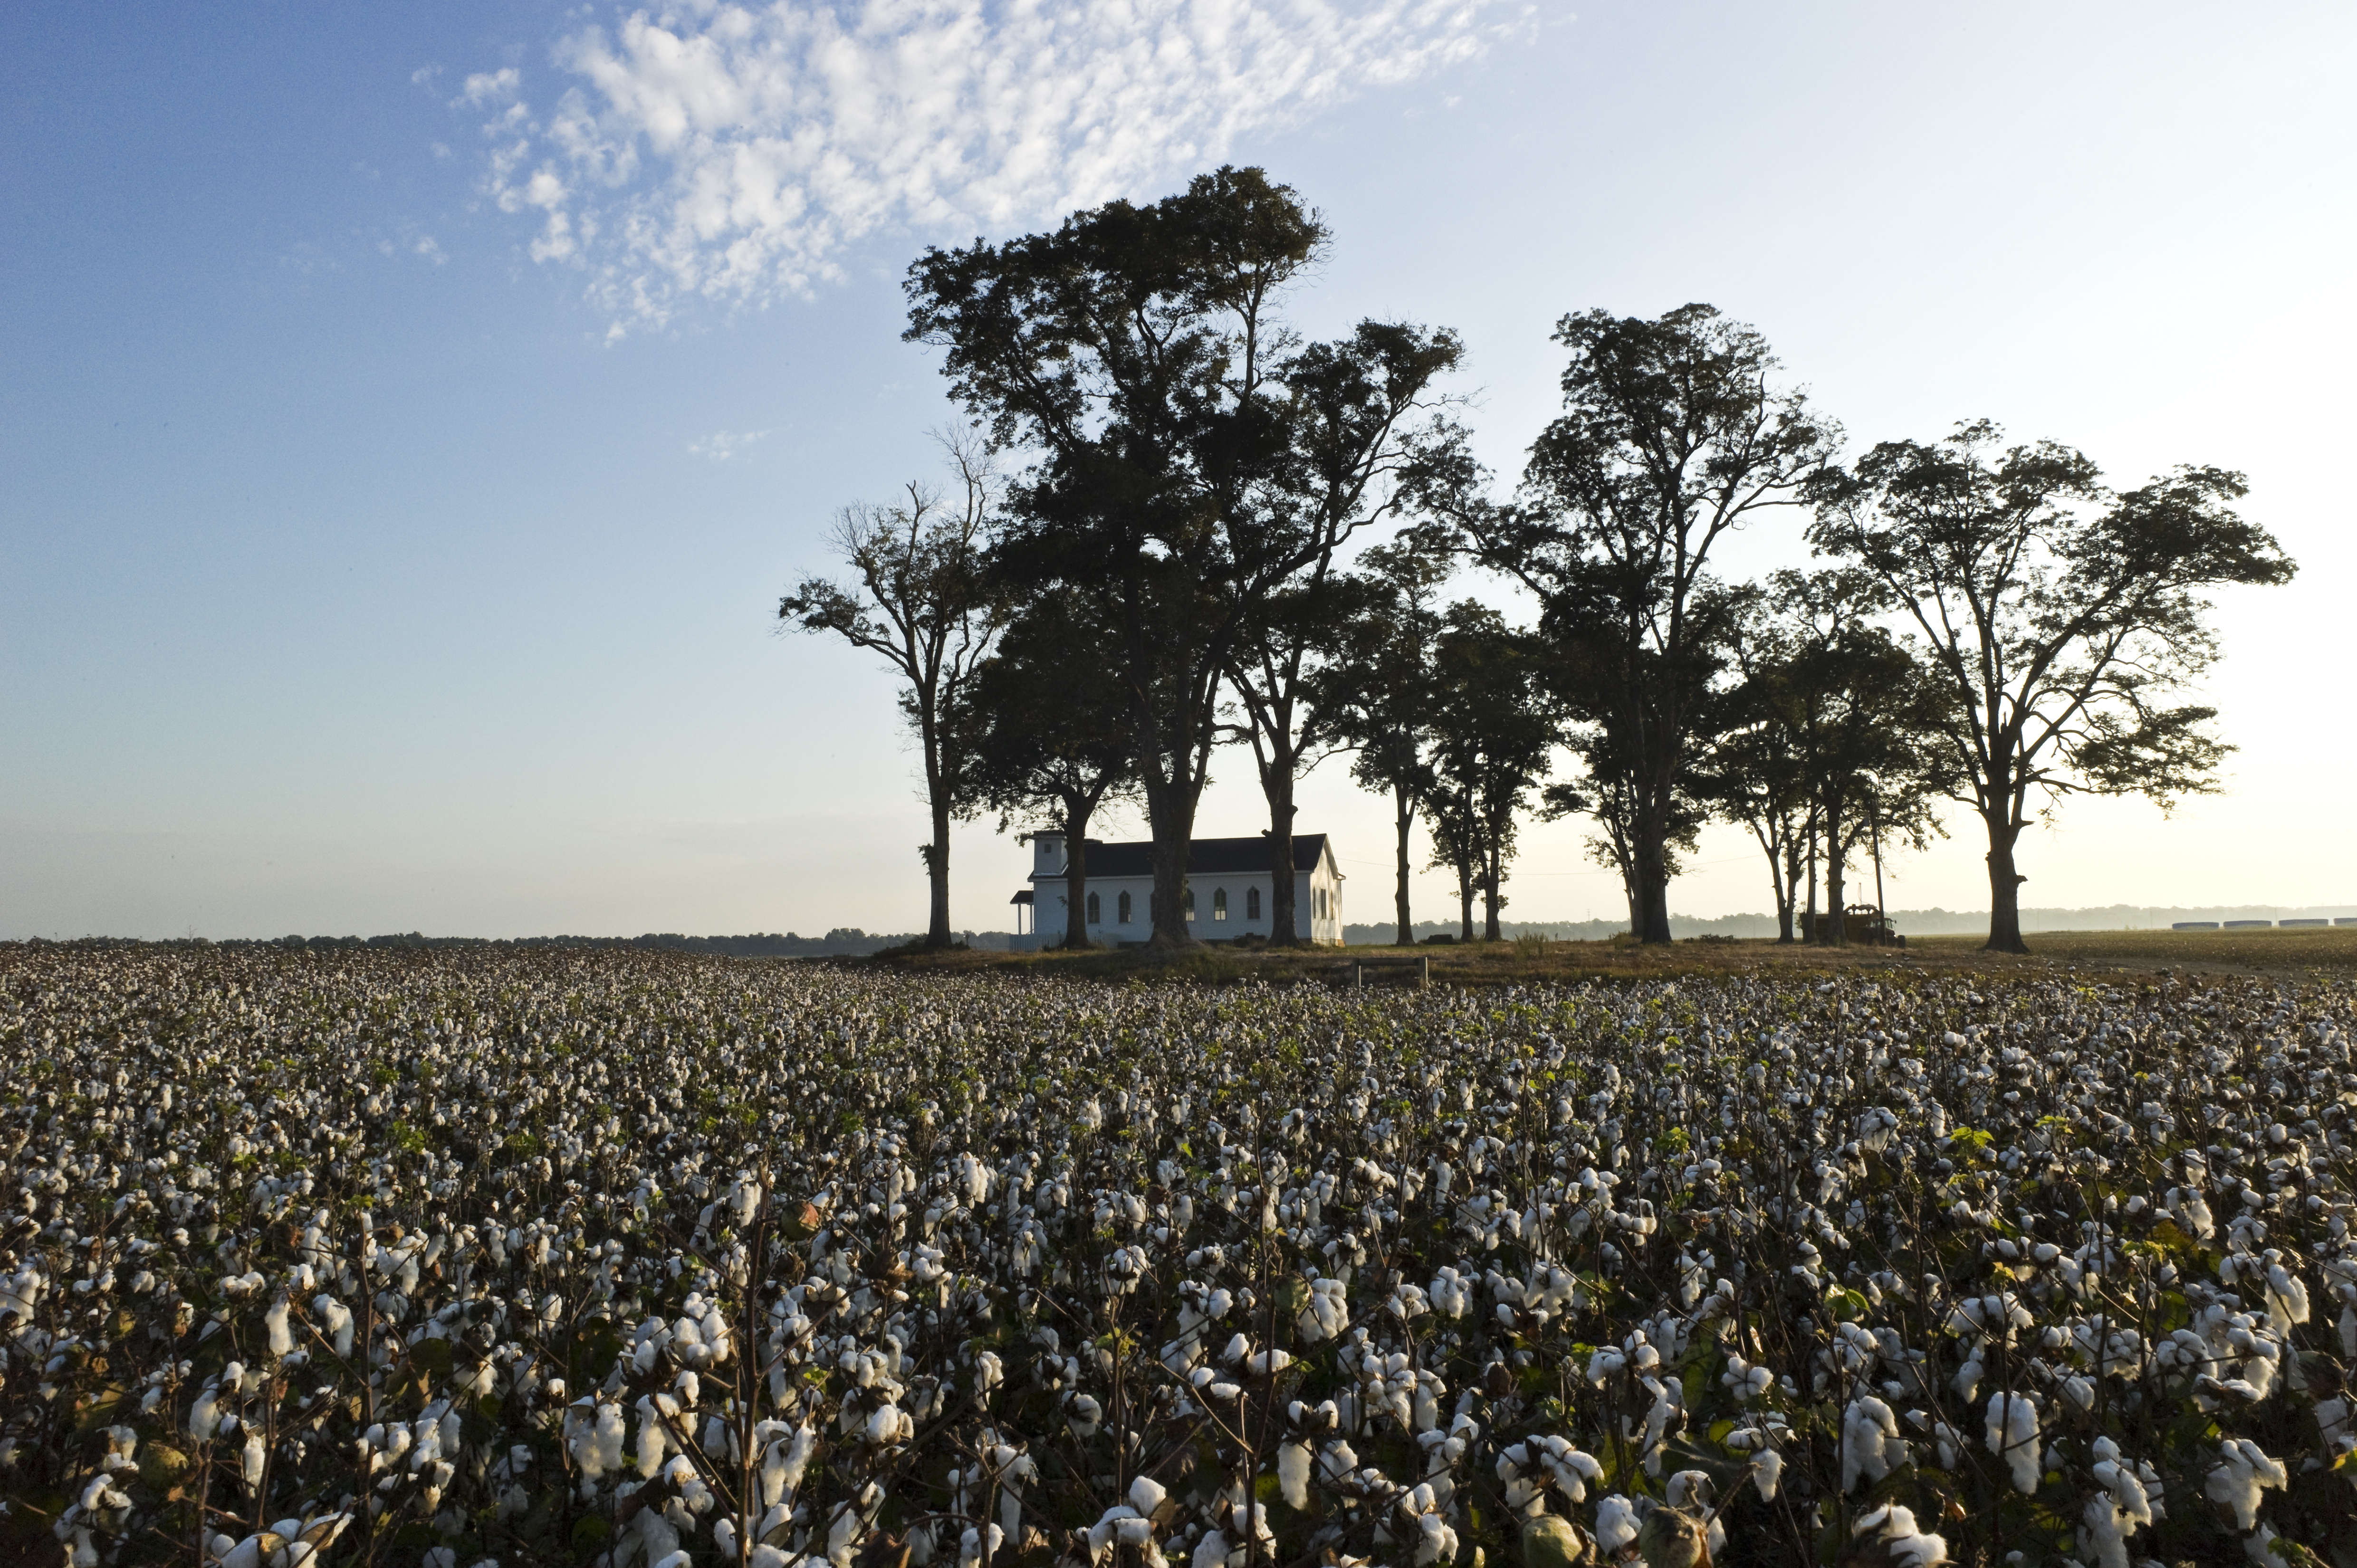 A small white chapel sits in a small grove of trees in the middle of a field of cotton.